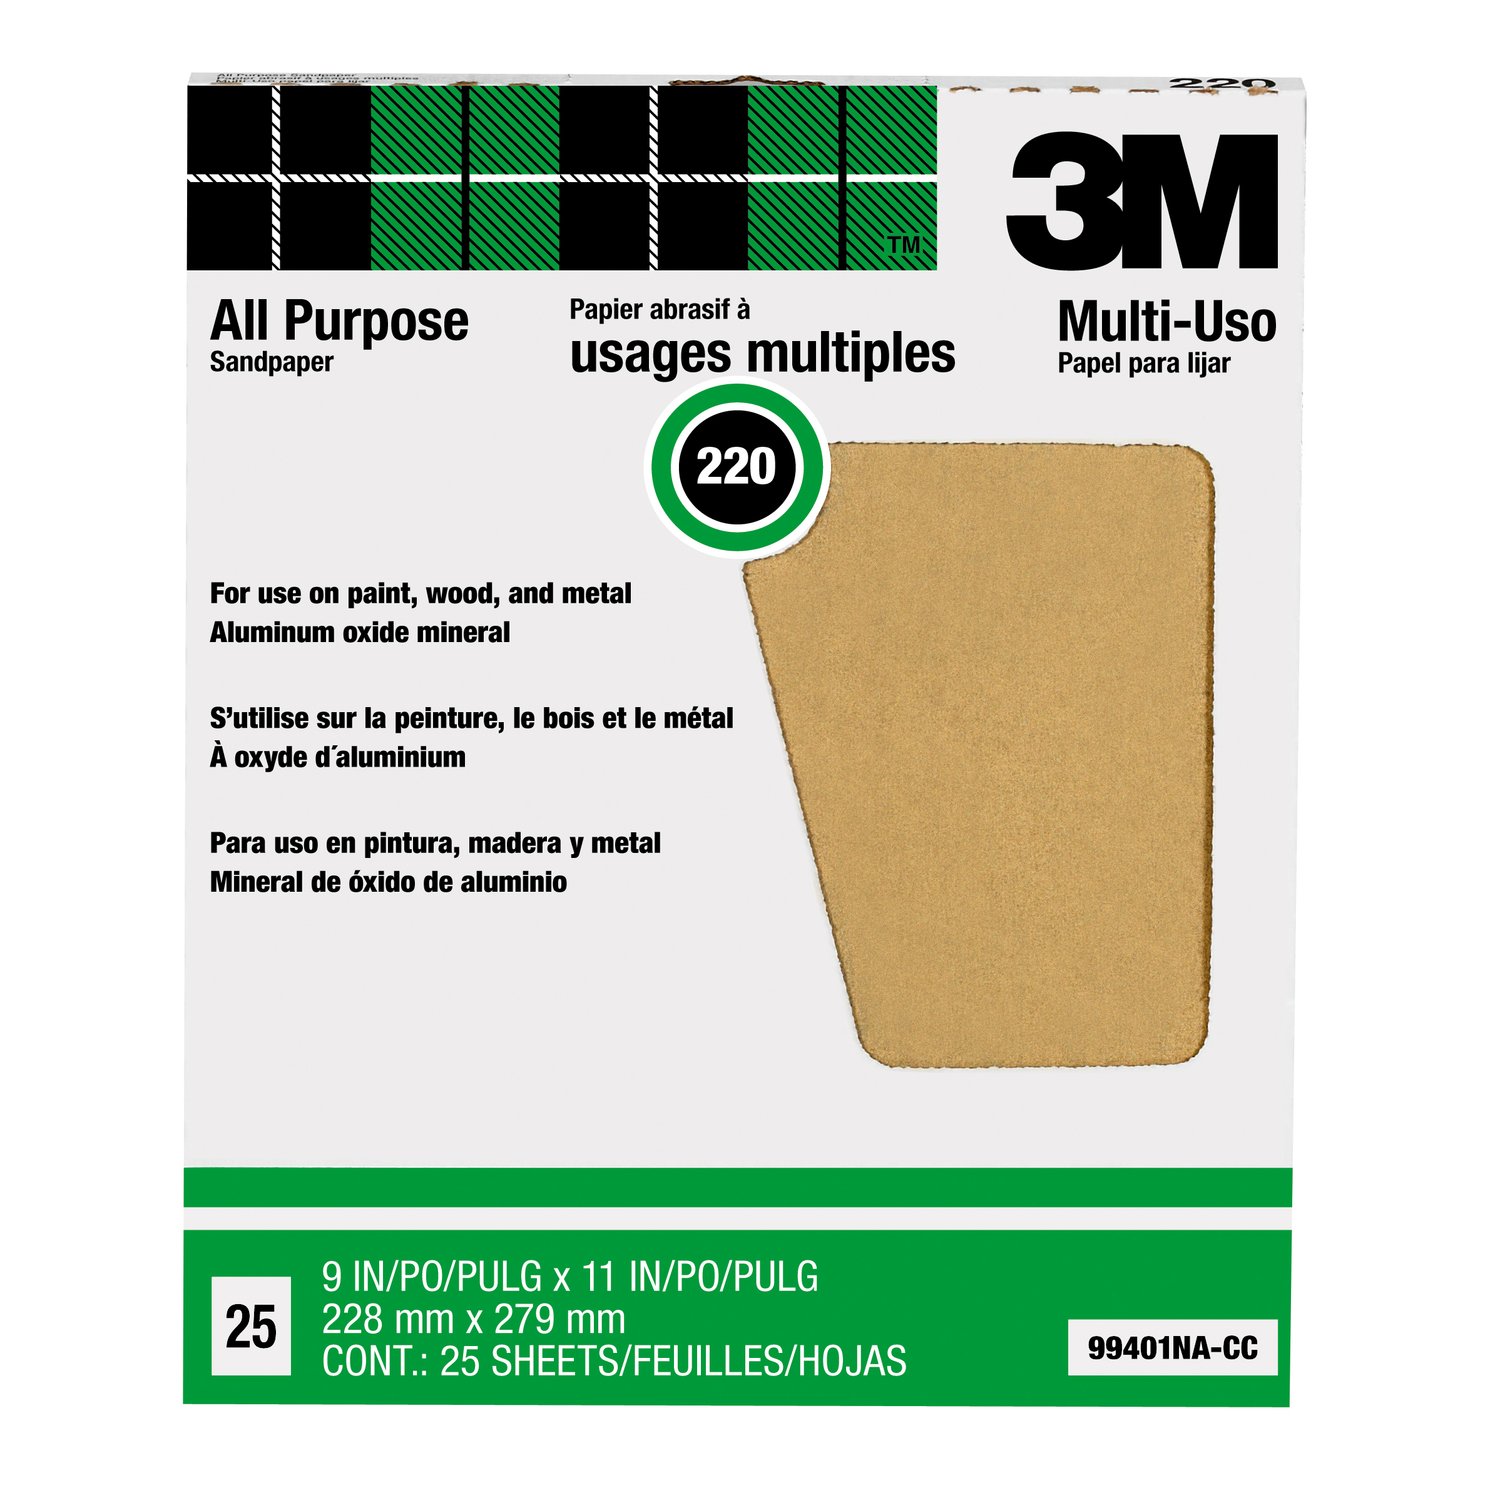 7100089199 - 3M Pro-Pak Aluminum Oxide Sheets for Paint and Rust Removal, 9 in x 11
in, 220 grit, Open Stock